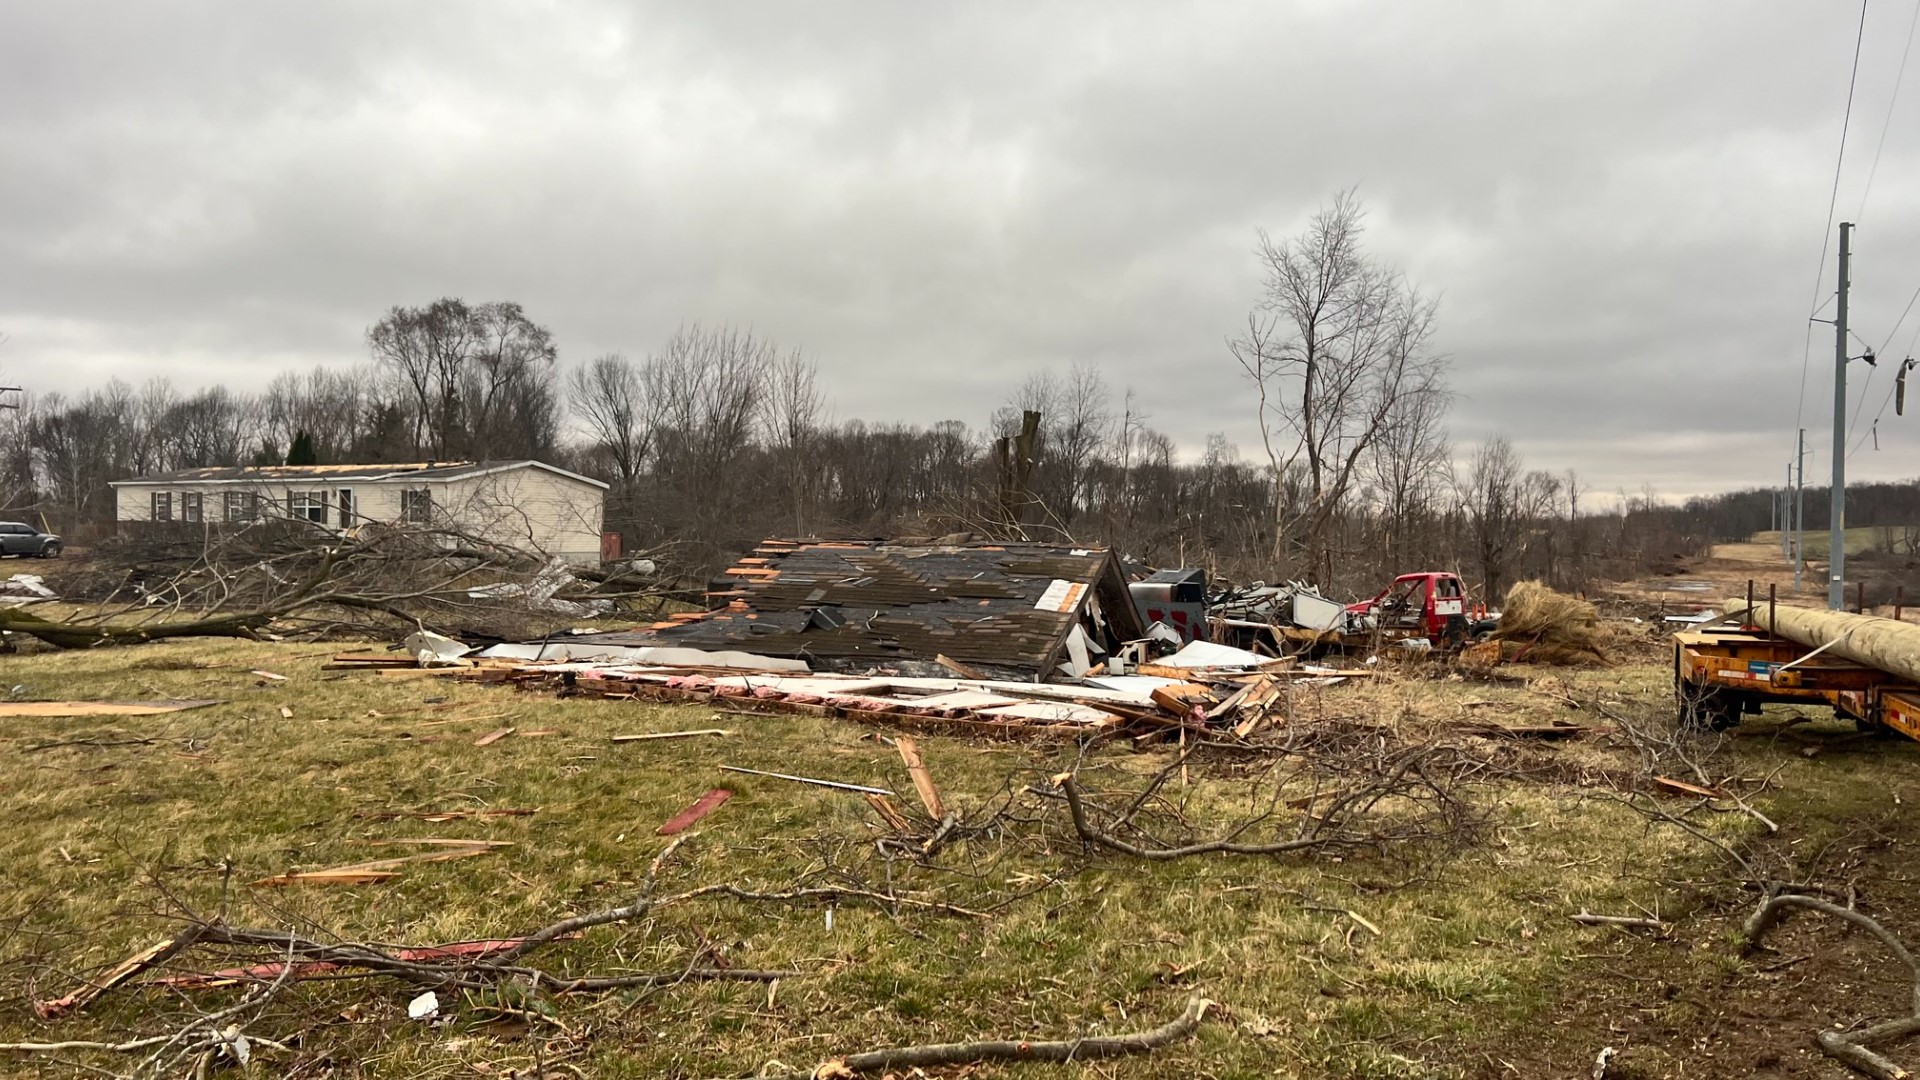 The Calhoun County Sheriff's Office shared some photos of the damage caused by a tornado early Wednesday morning.